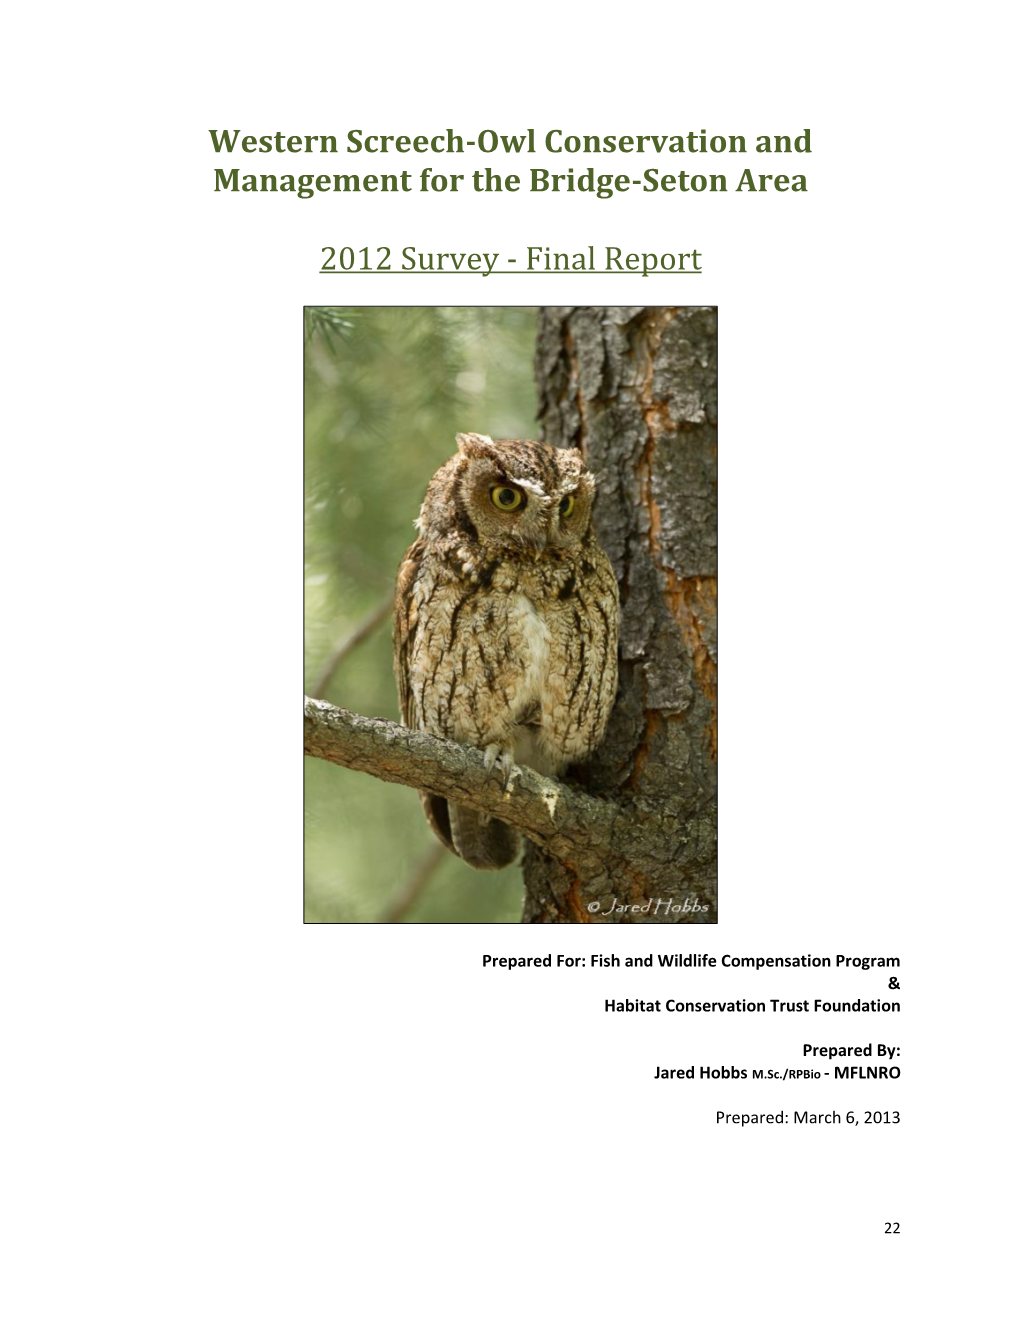 Western Screech-Owl Conservation and Management for the Bridge-Seton Area